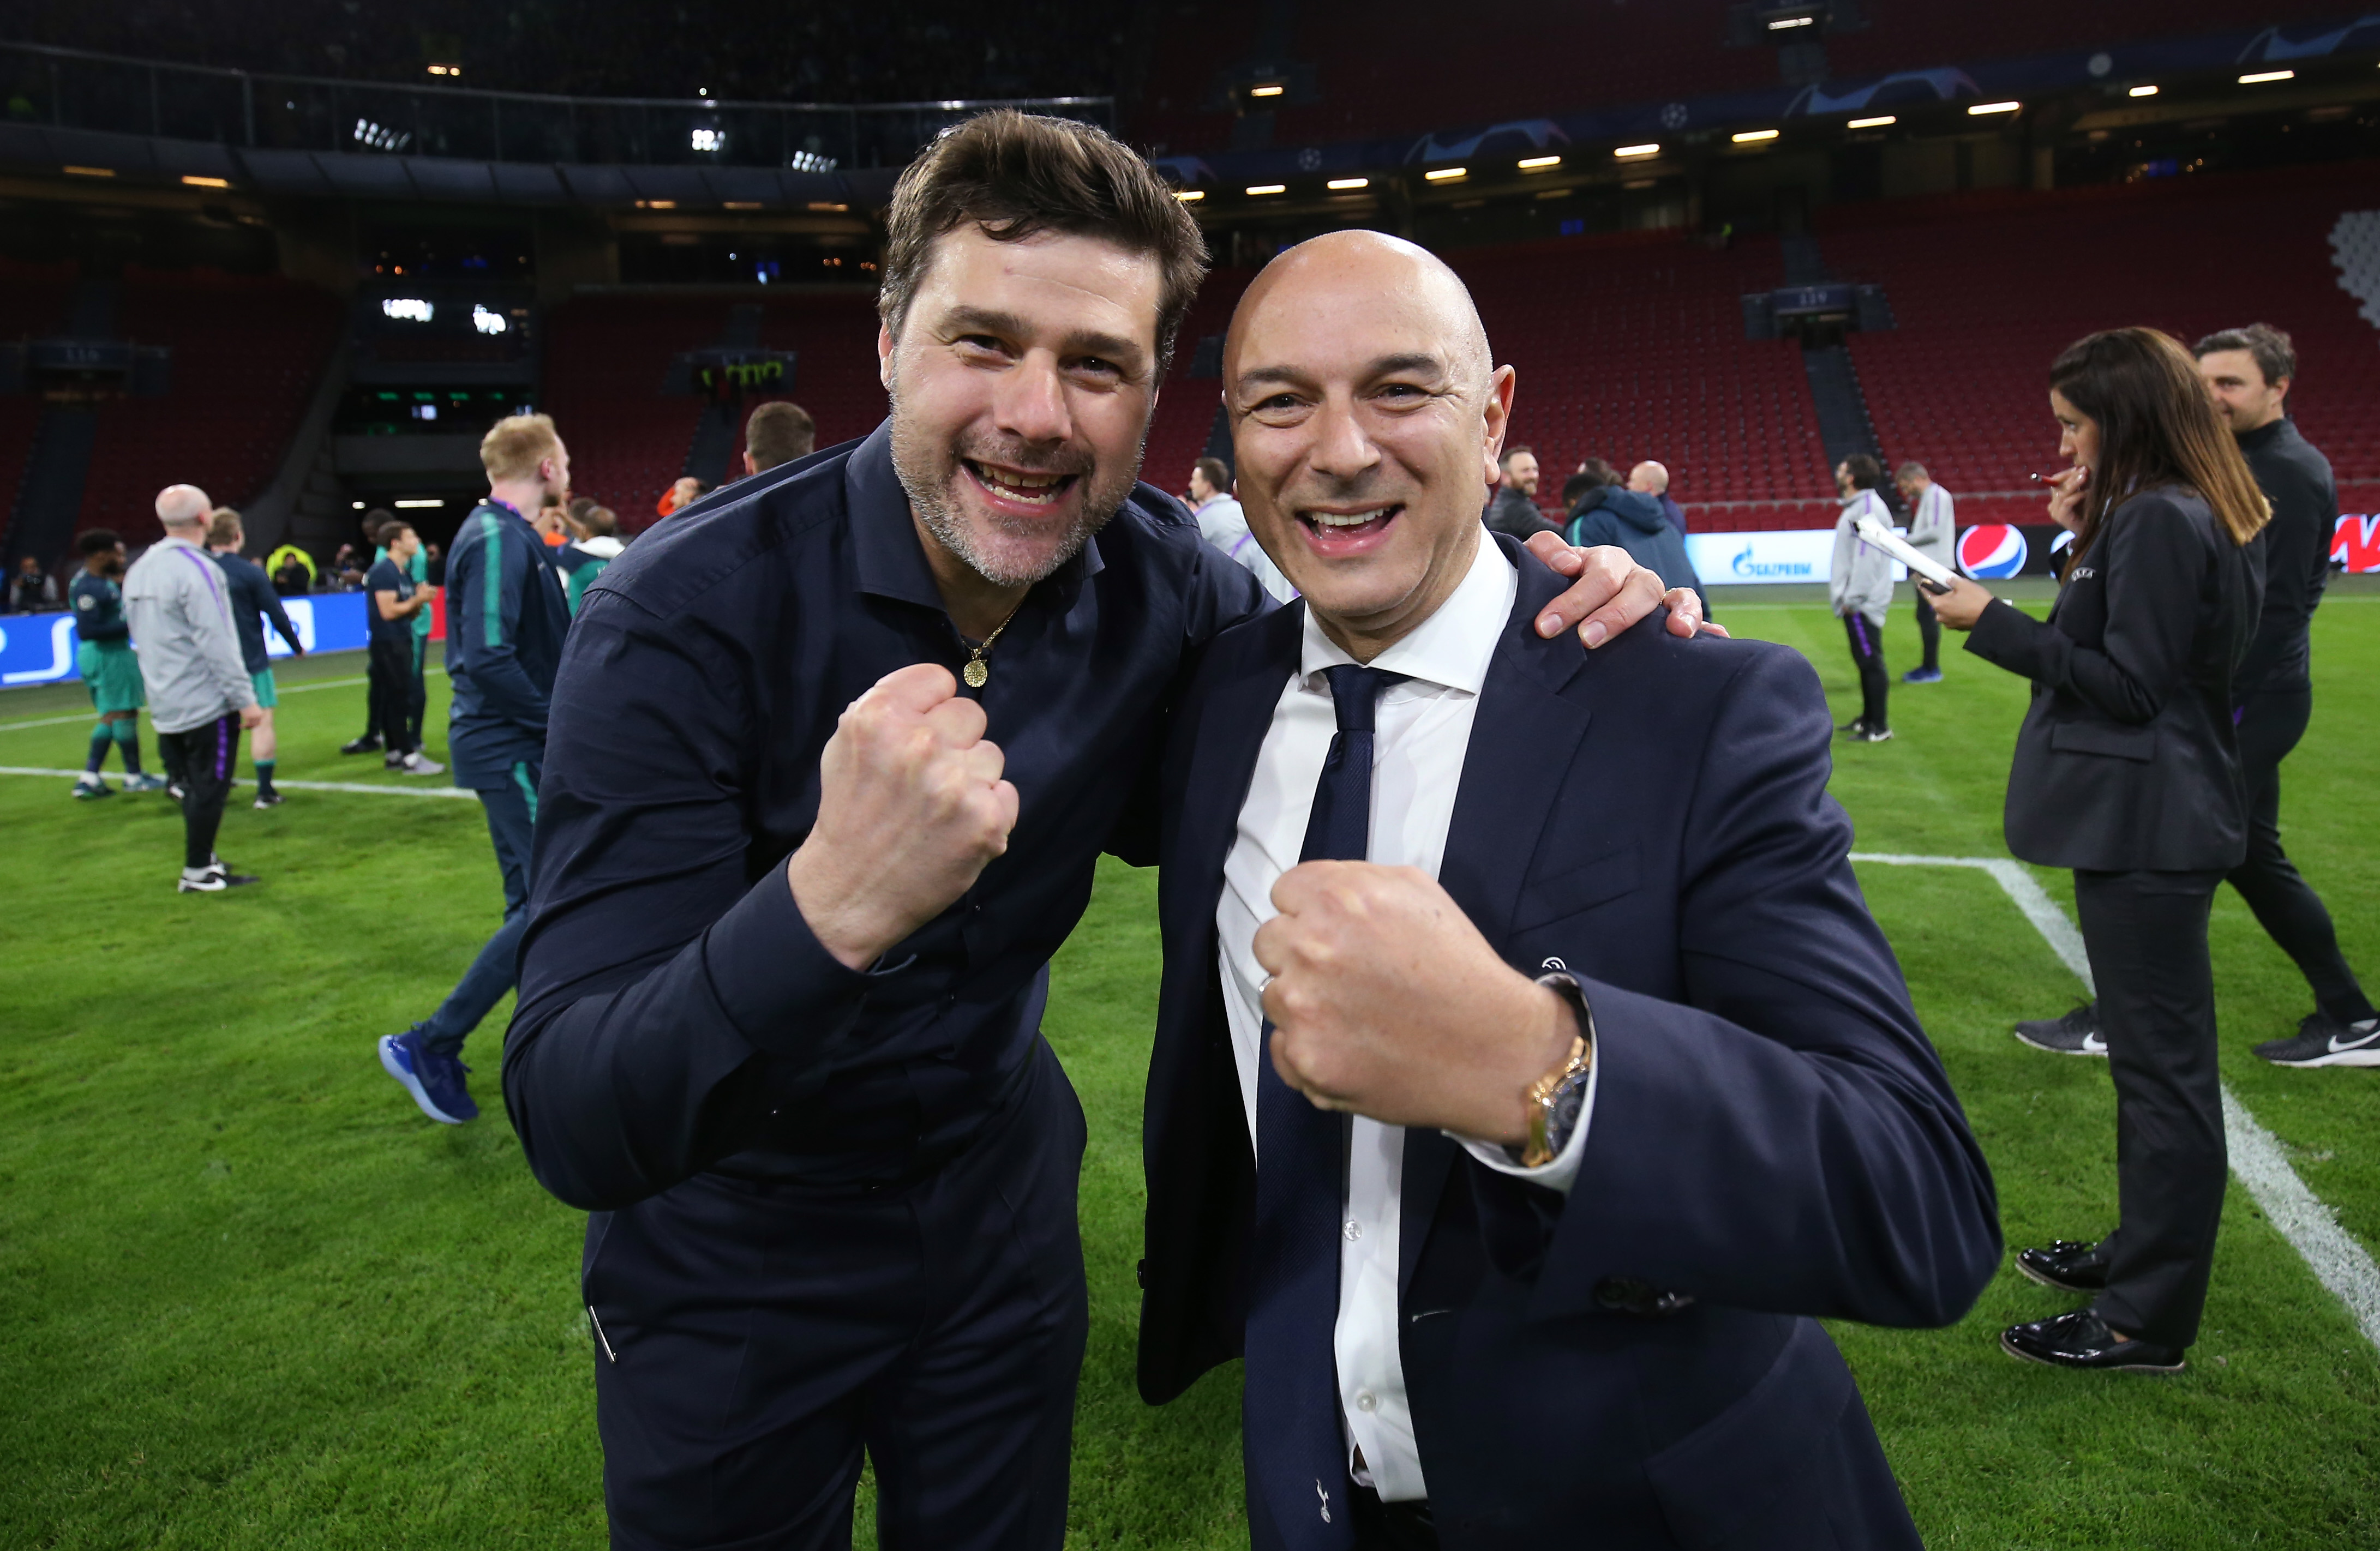 Happier times for Mauricio Pochettino and owner Daniel Levy after Tottenham had qualified for the Champions League Final by winning in Amsterdam. Now their relationship appears to be strained